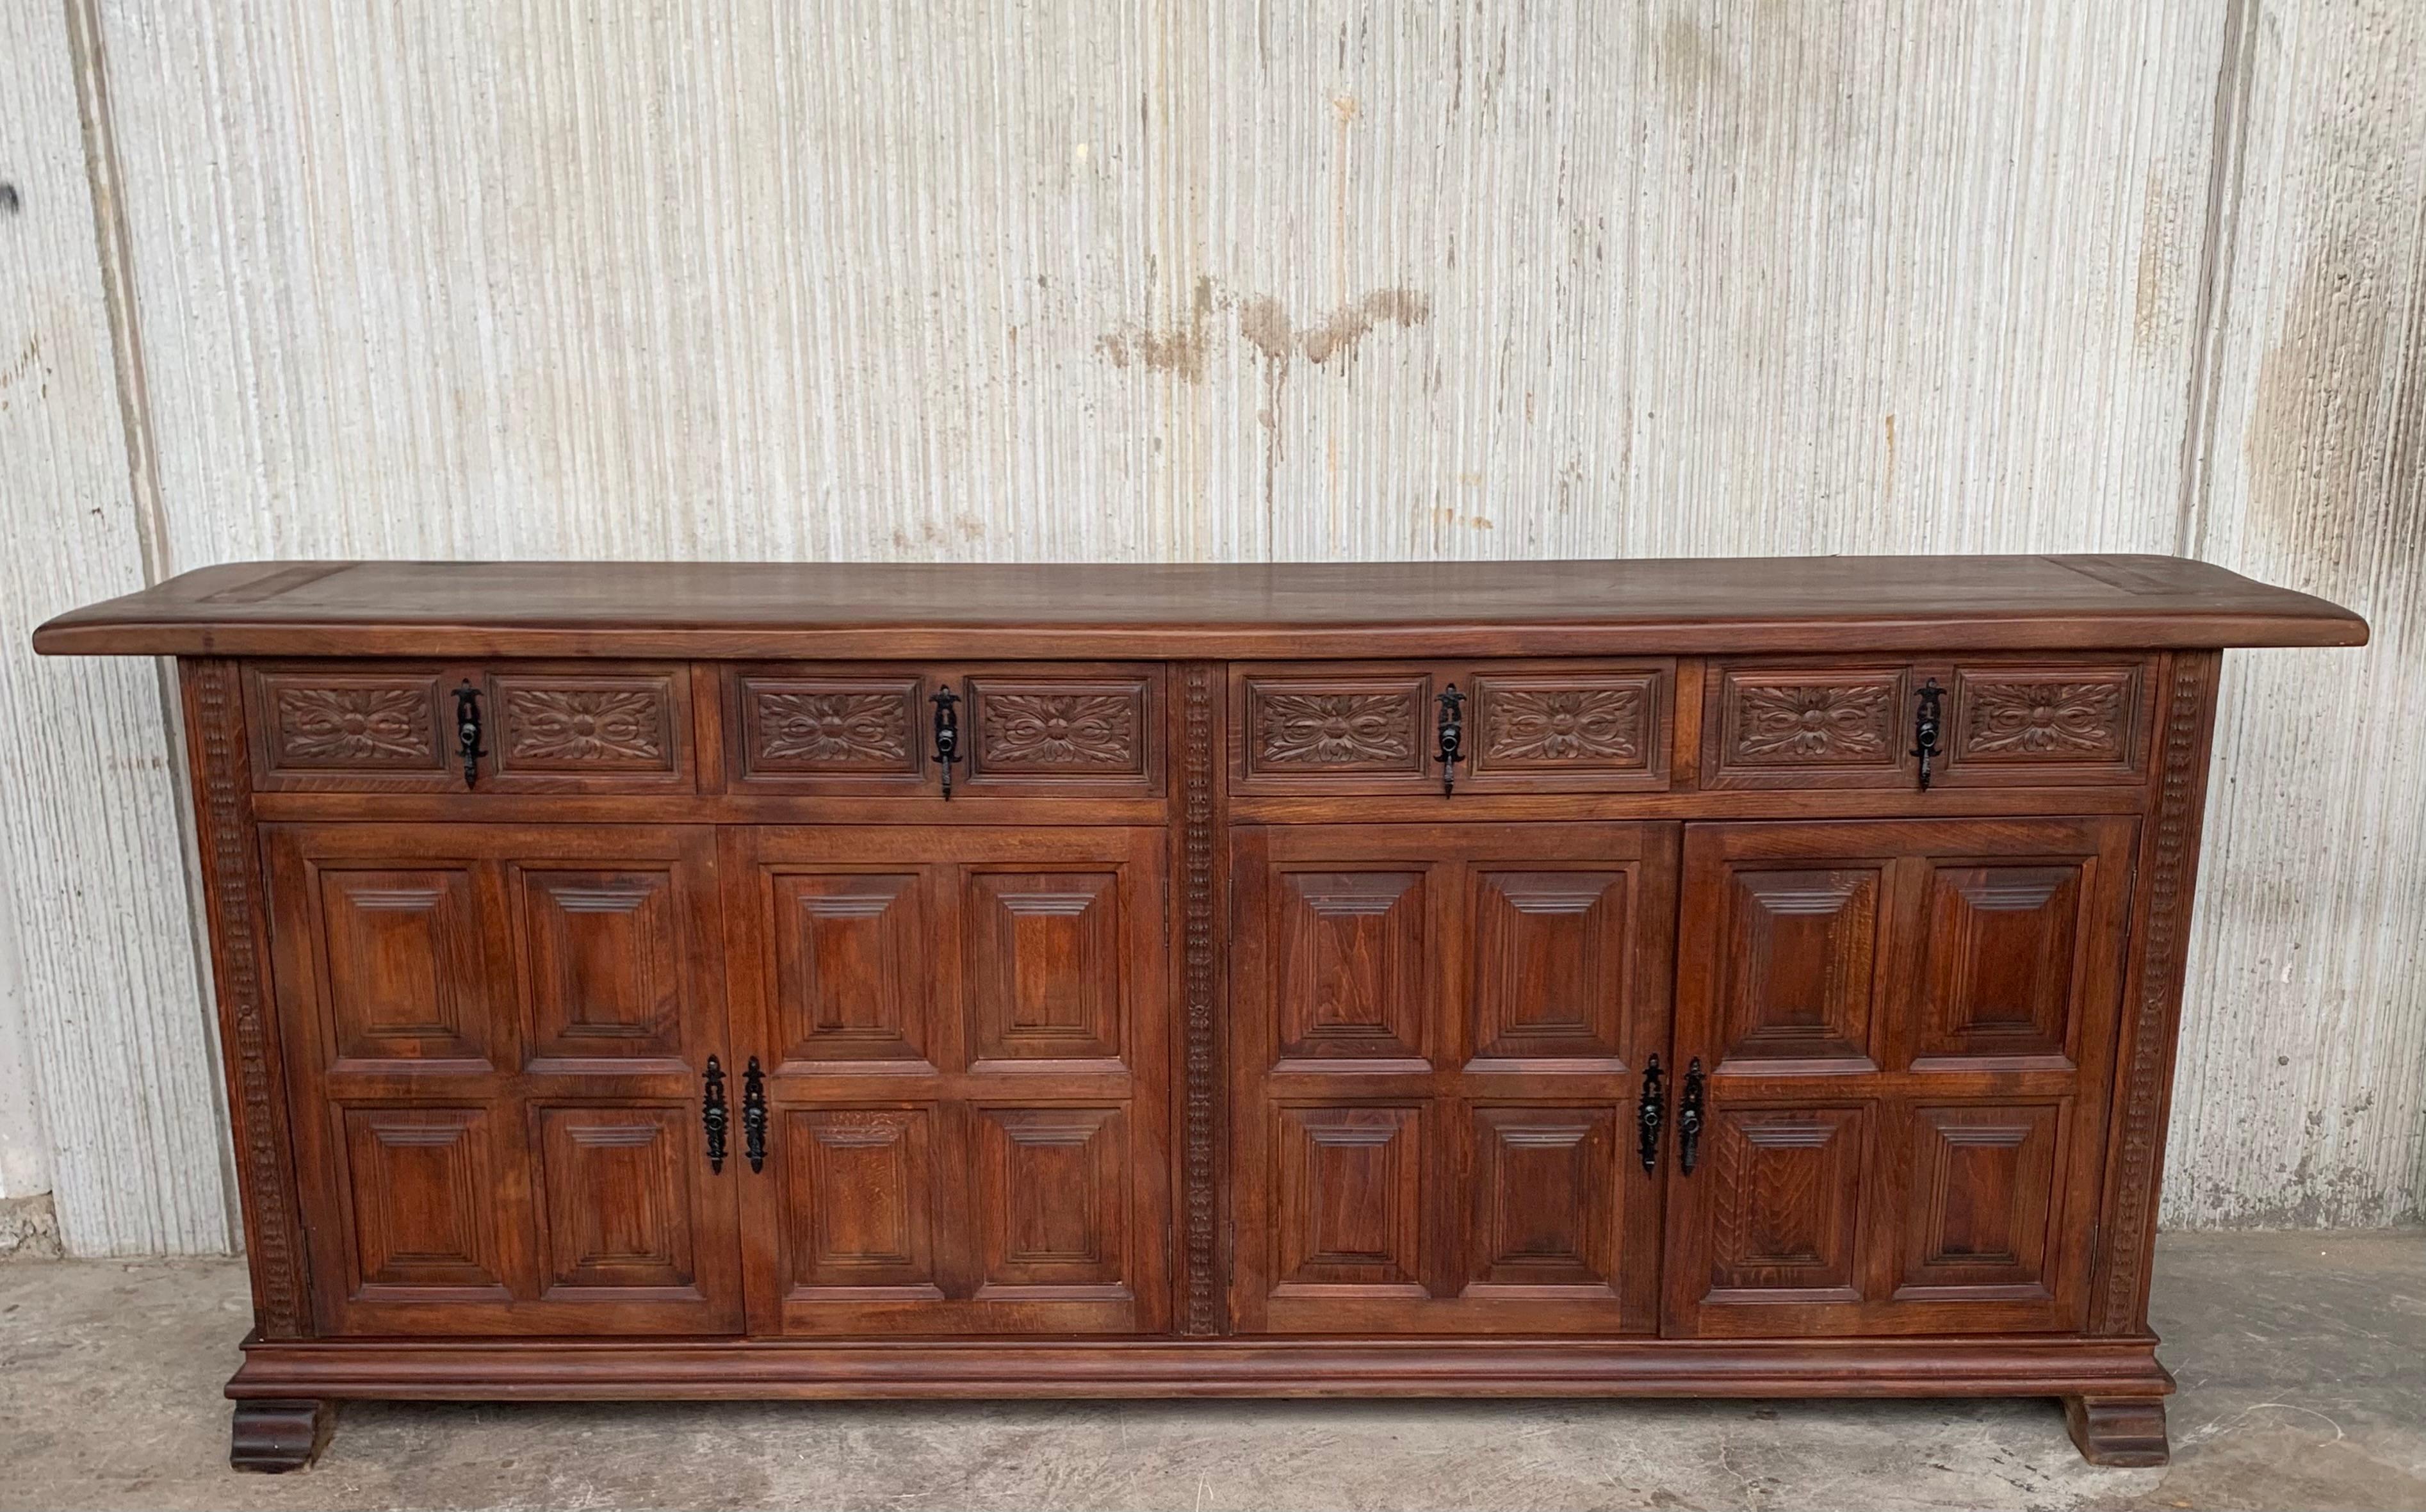 From Northern Spain, constructed of solid walnut, the rectangular top with molded edge atop a conforming case housing four drawers over four doors, the doors paneled with solid walnut, raised on a plinth base. The drawers are hand carved and the